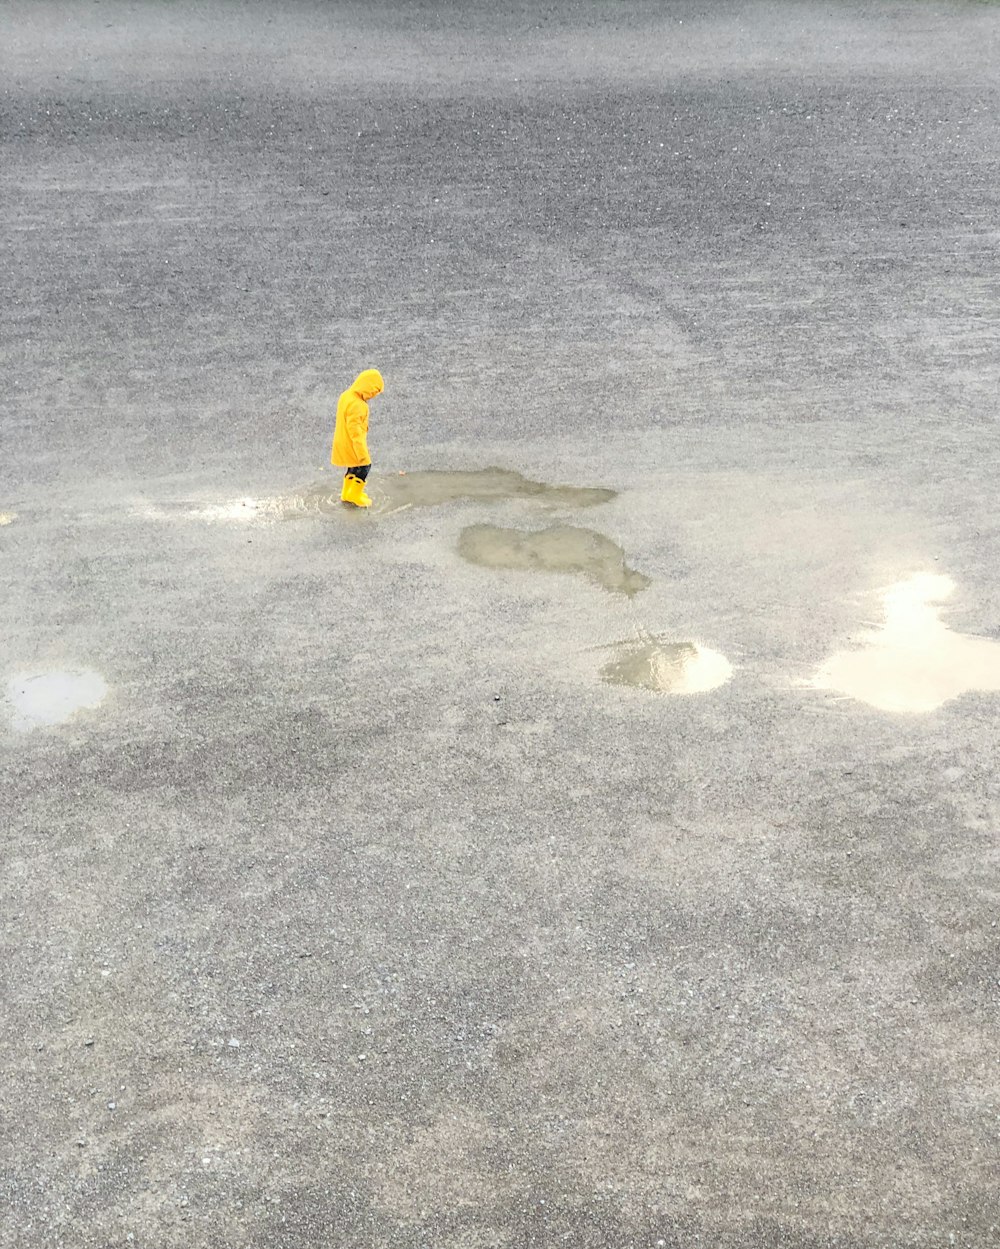 a person in a yellow jacket standing in the water